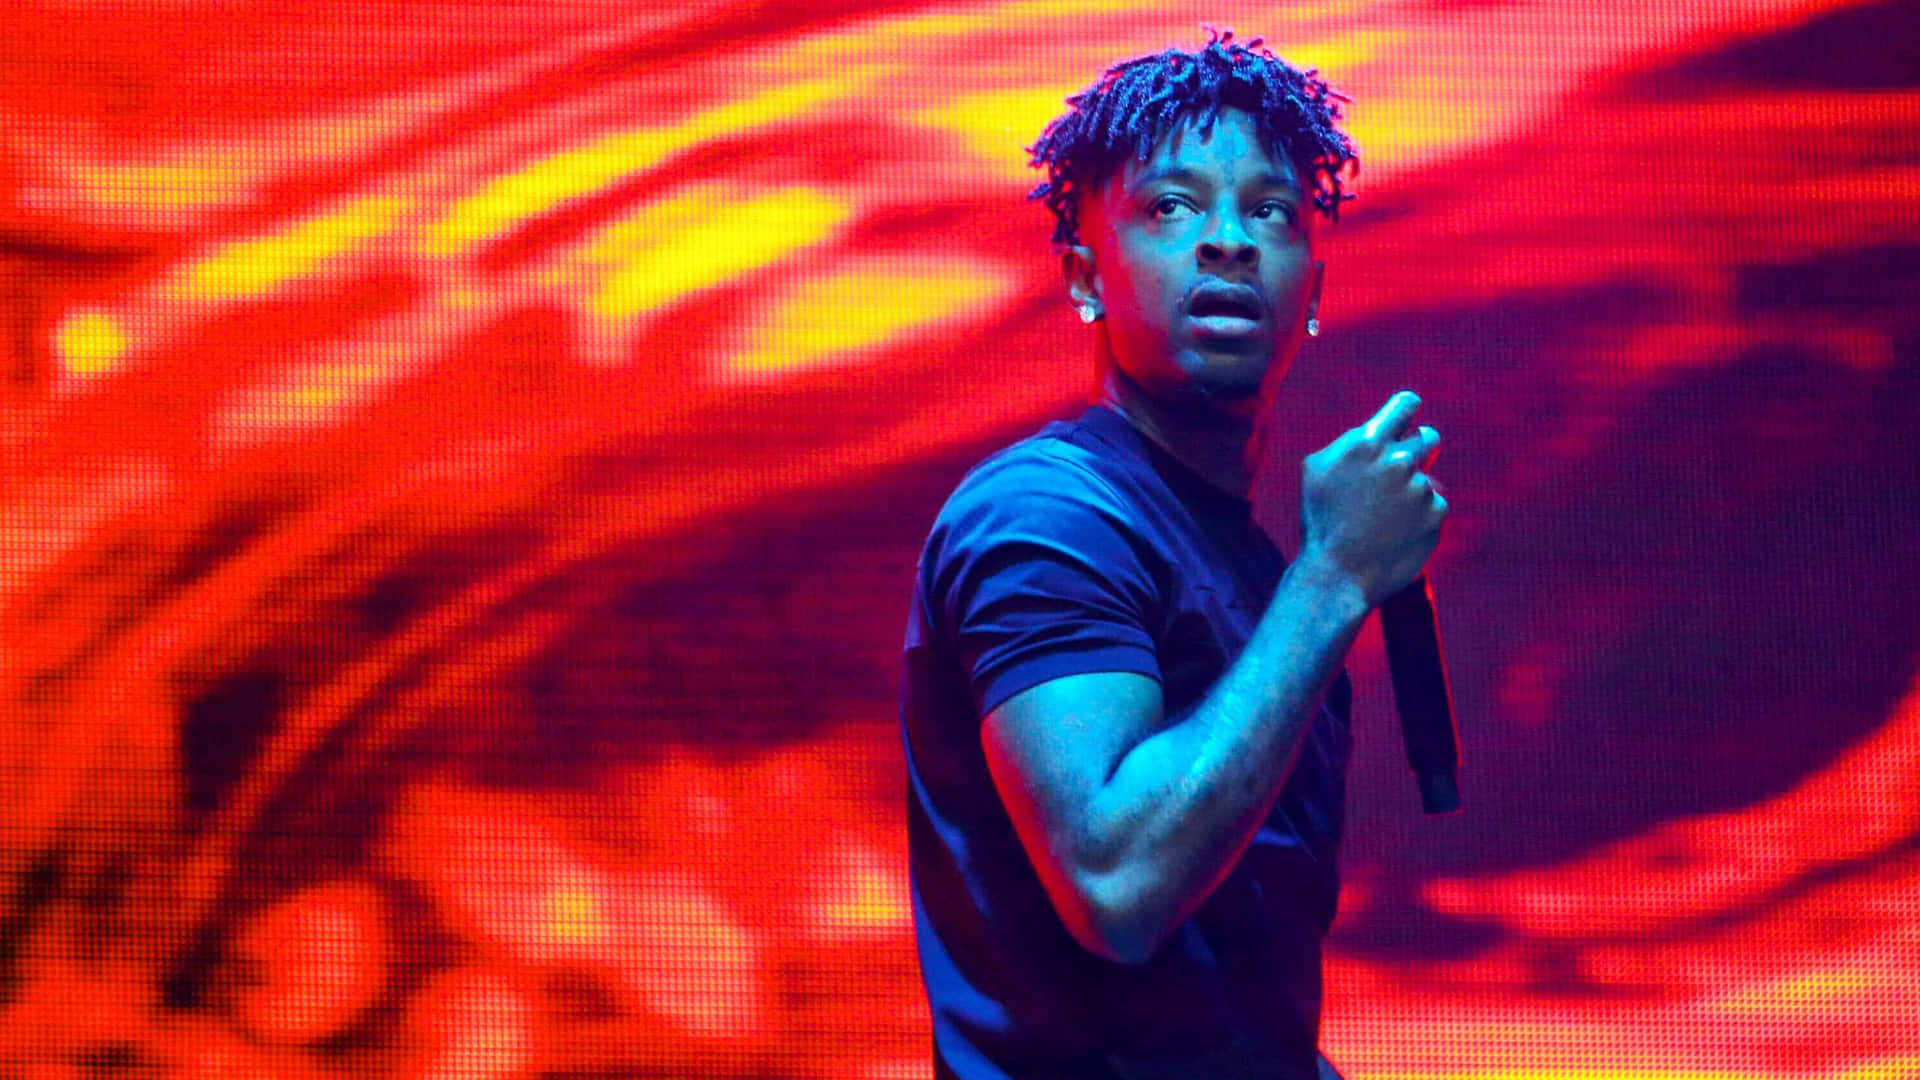 21 Savage In Spotlight - An Unforgettable Moment